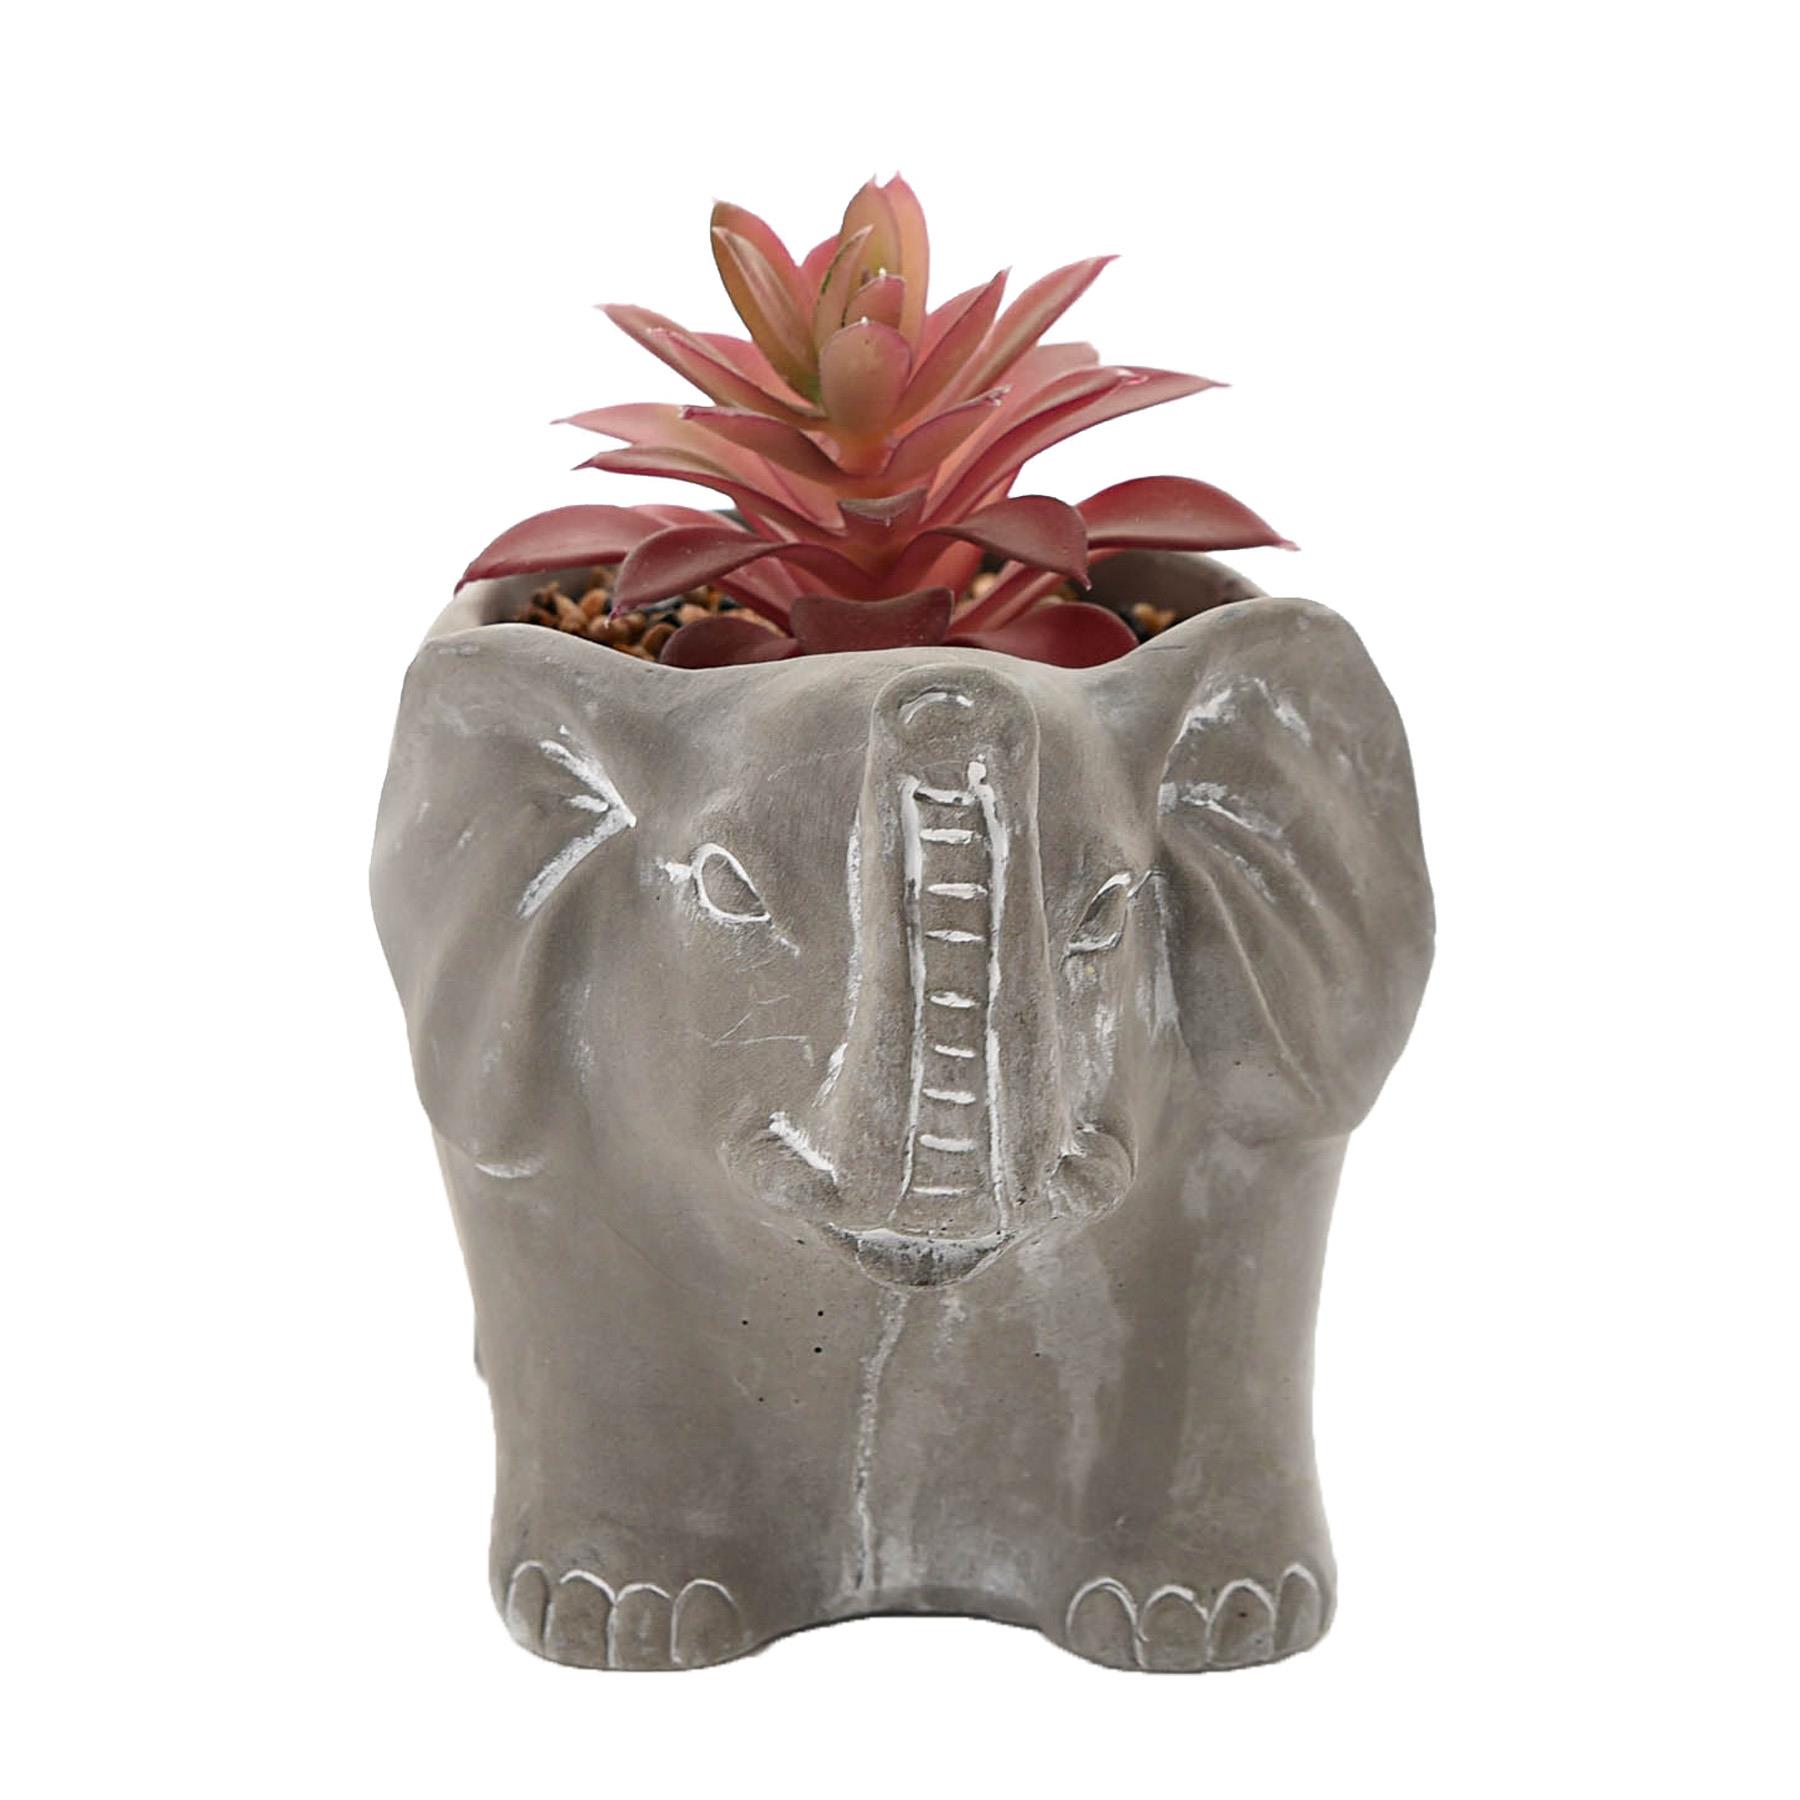 Cement Effect Animal Planter with Succulent - Elephant